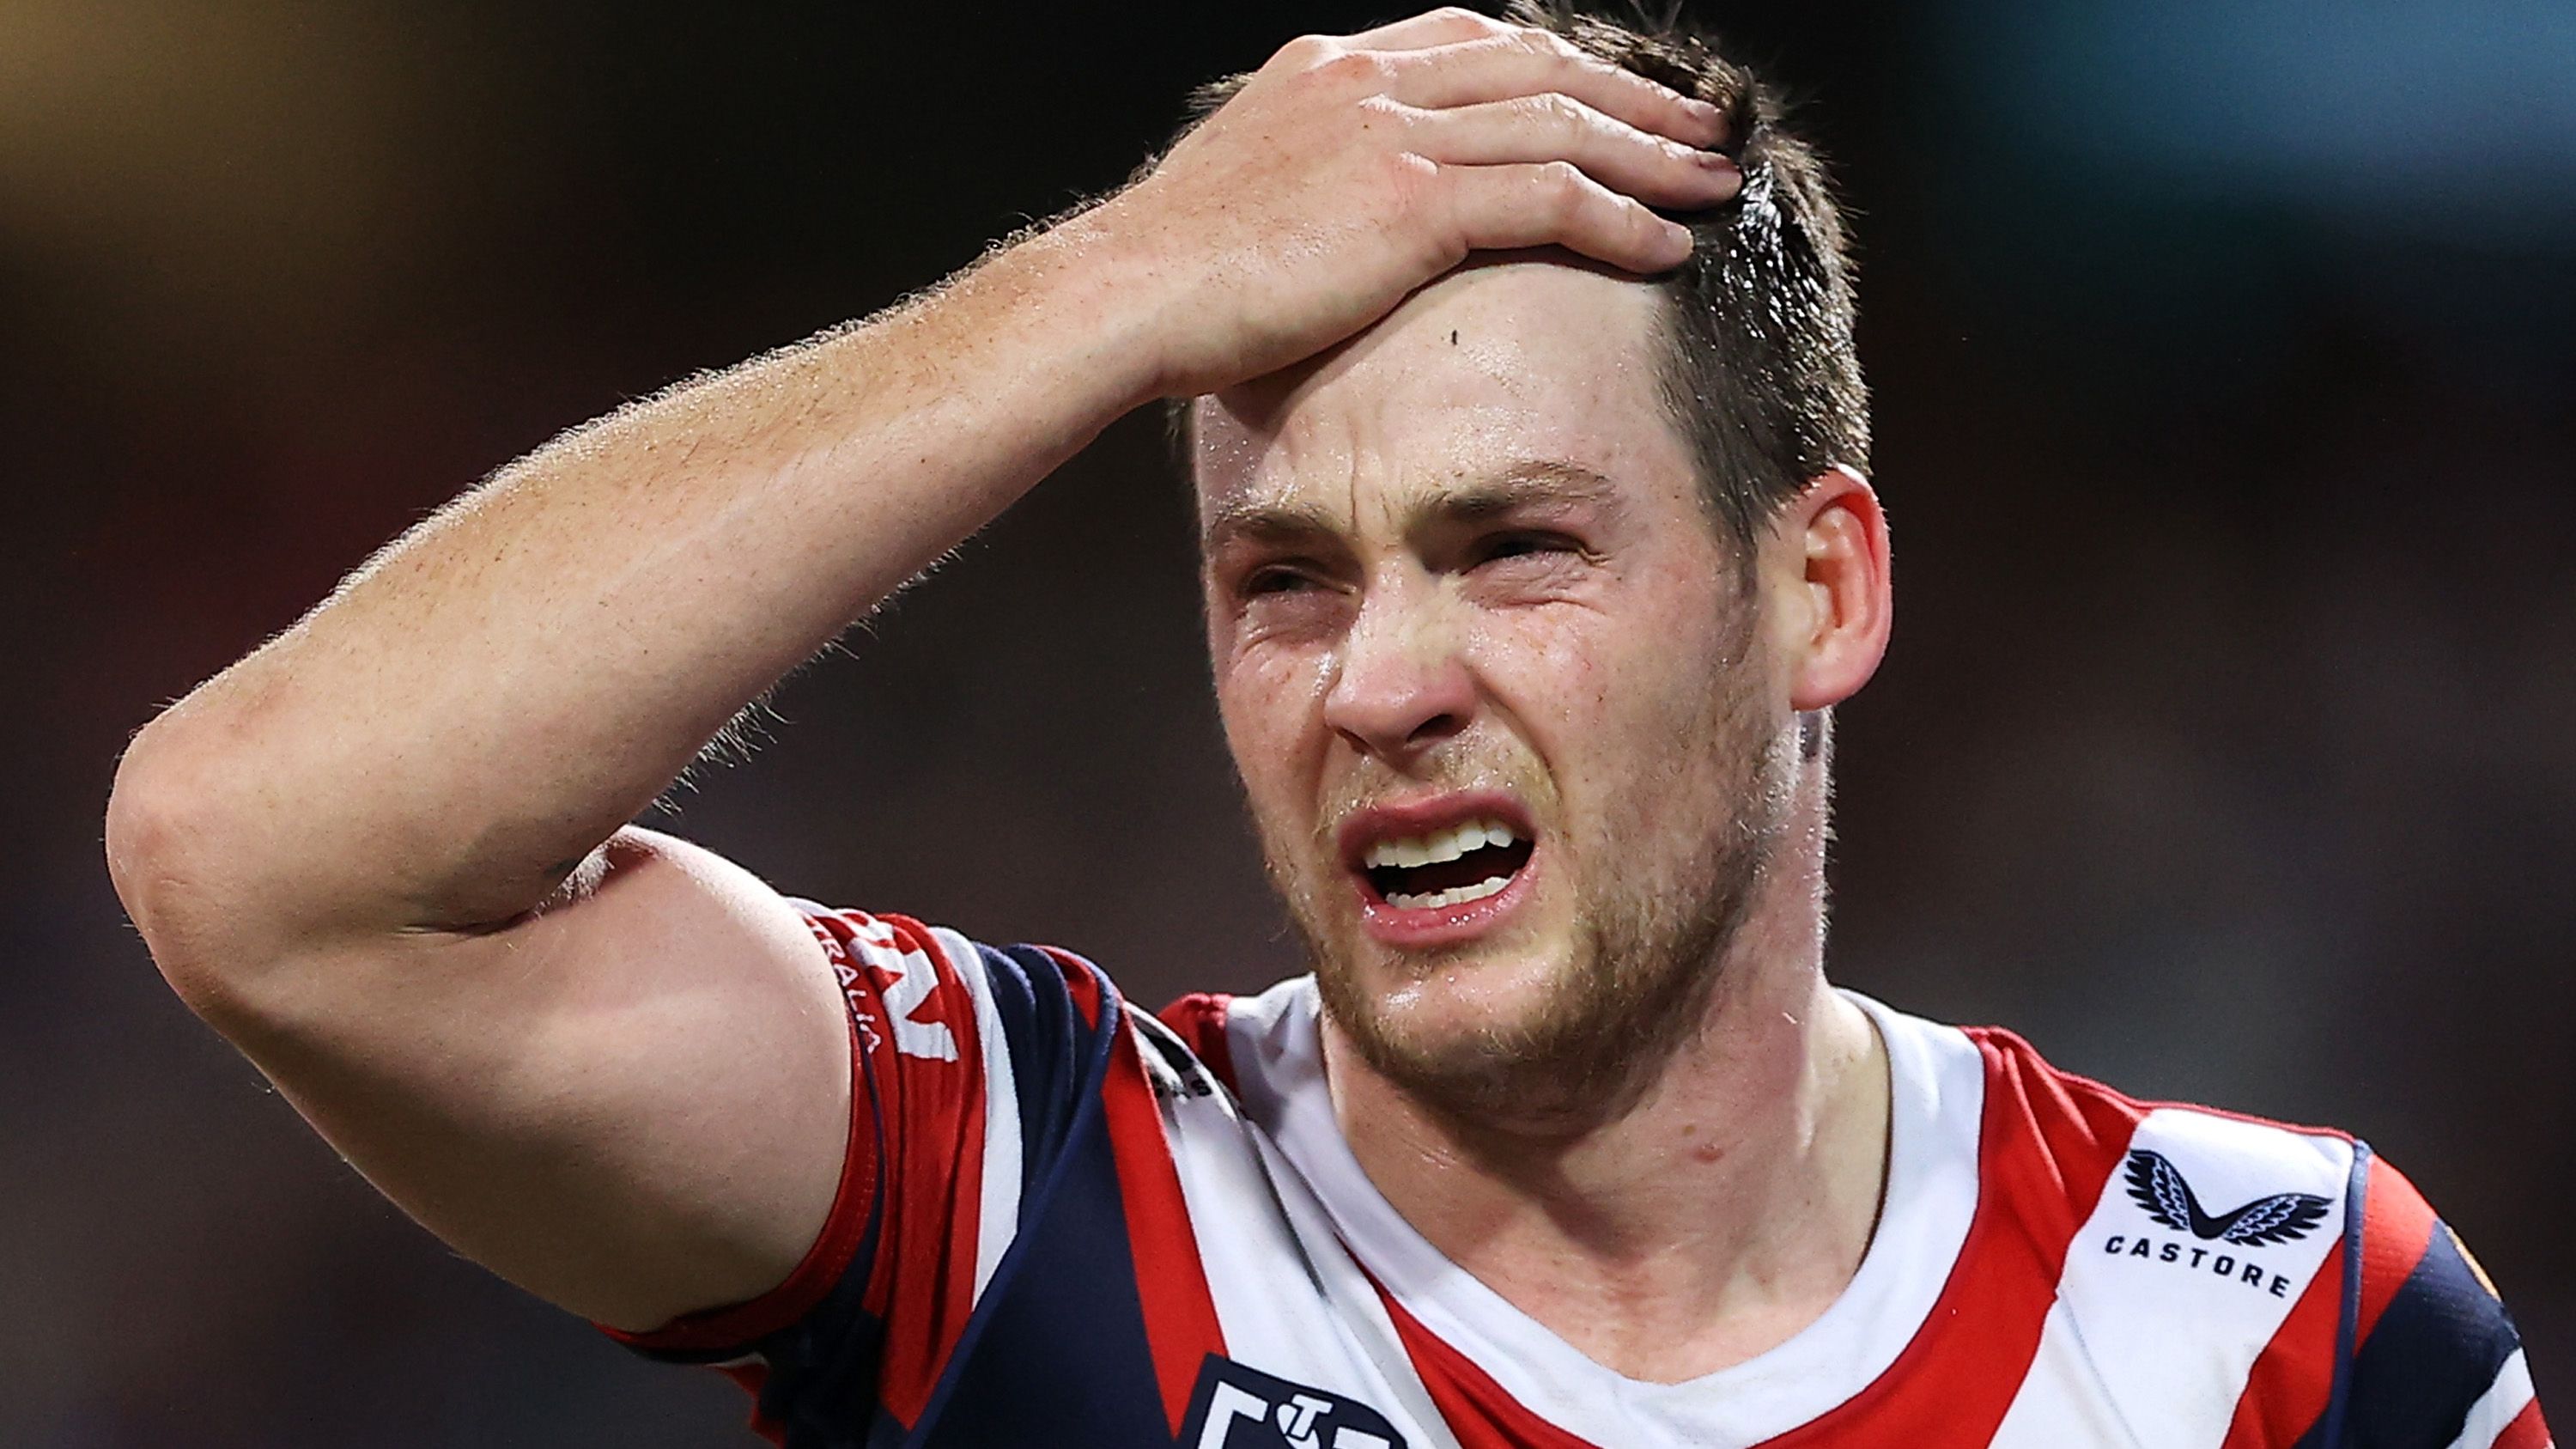 Luke Keary holds his head as he leaves the field for a HIA against the Storm on Saturday night. (Photo by Mark Kolbe/Getty Images)